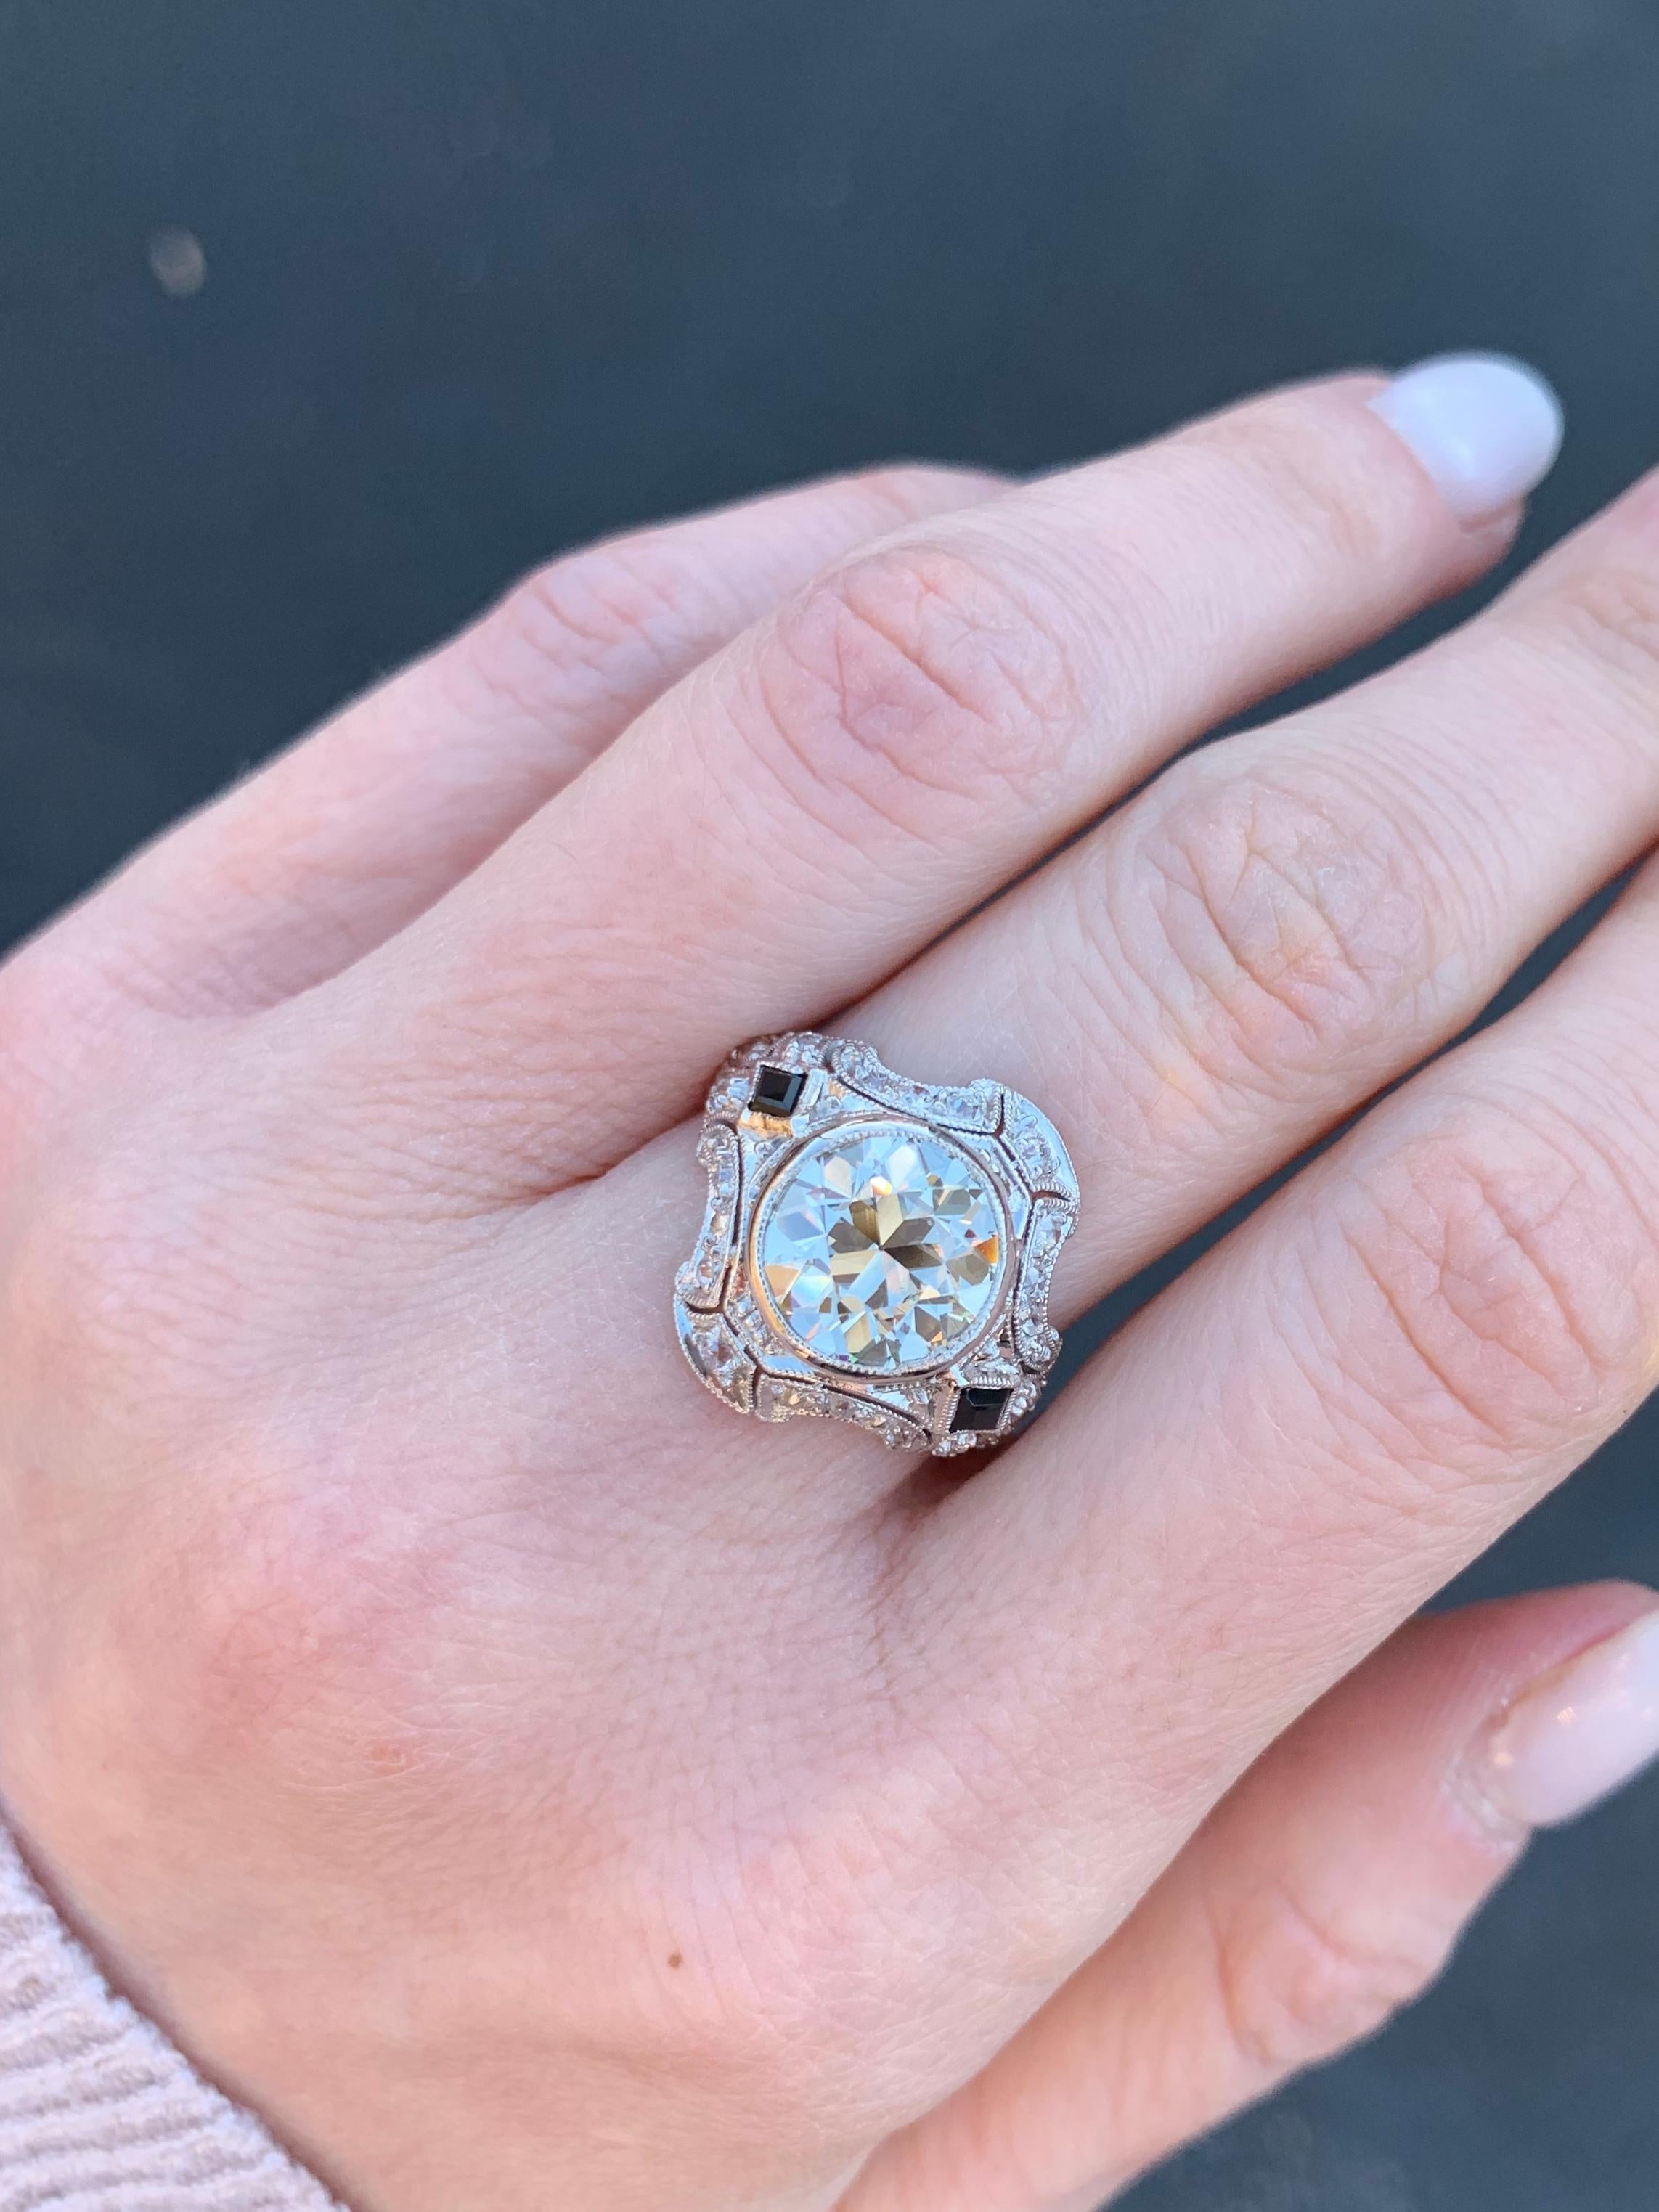 Circa 1950’s, this vintage platinum shield style ring is heavily Edwardian-era influenced featuring a lively 2.40 carat round brilliant GIA certified diamond center. Ring is accented with 2 rhombus cut sapphires and further adorned with 24